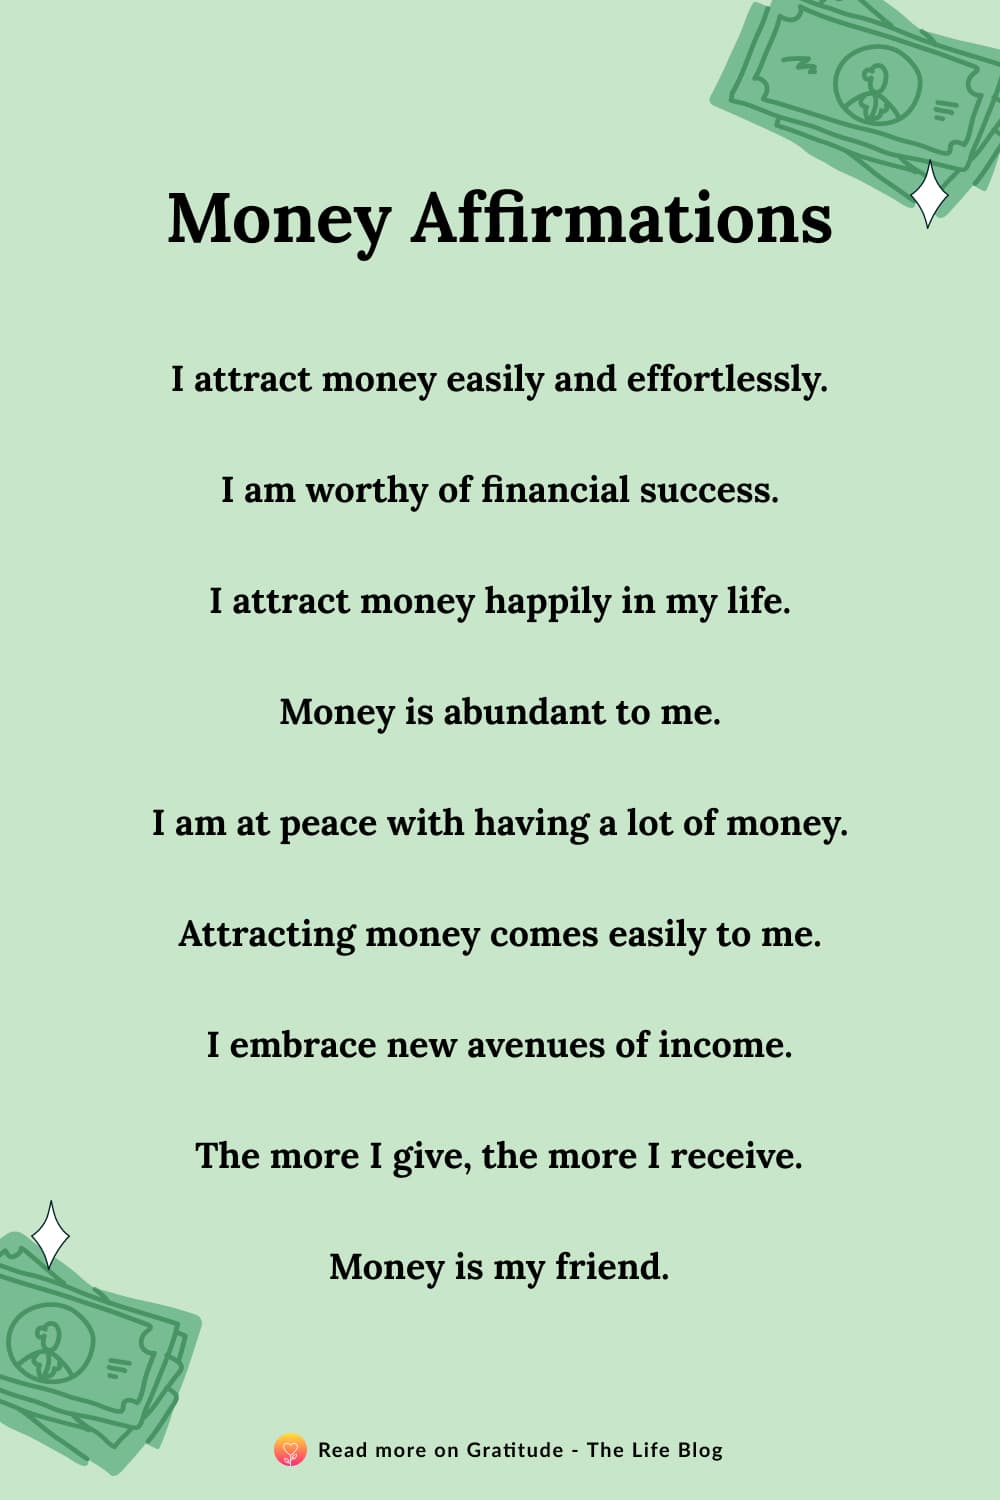 Illustration with list of money affirmations